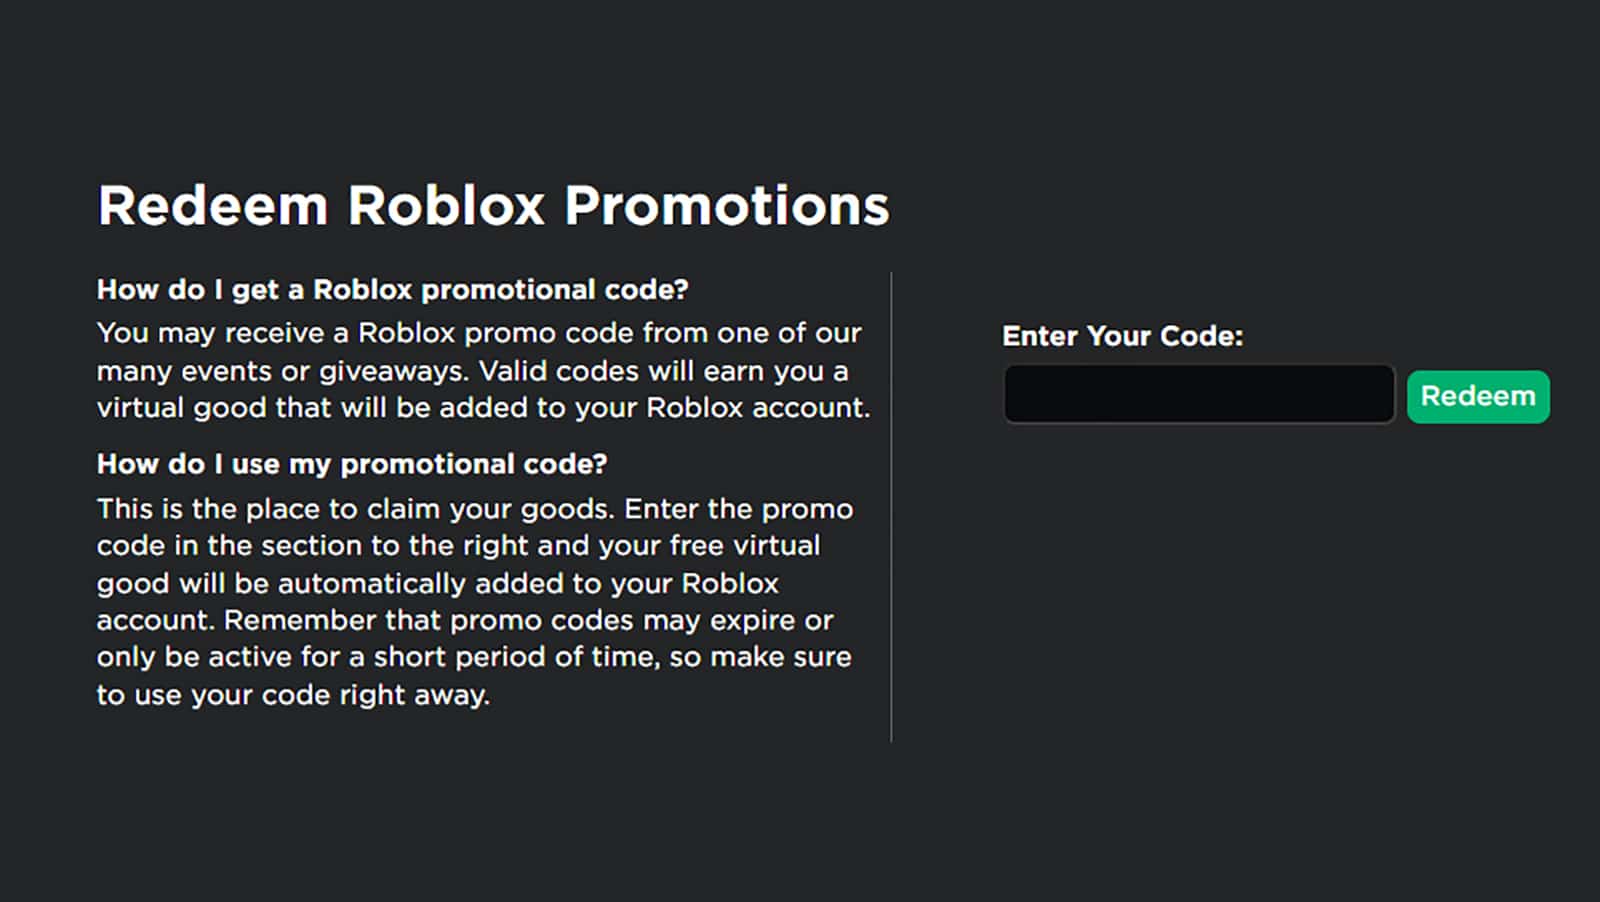 An image showing the location to enter promo codes in Roblox